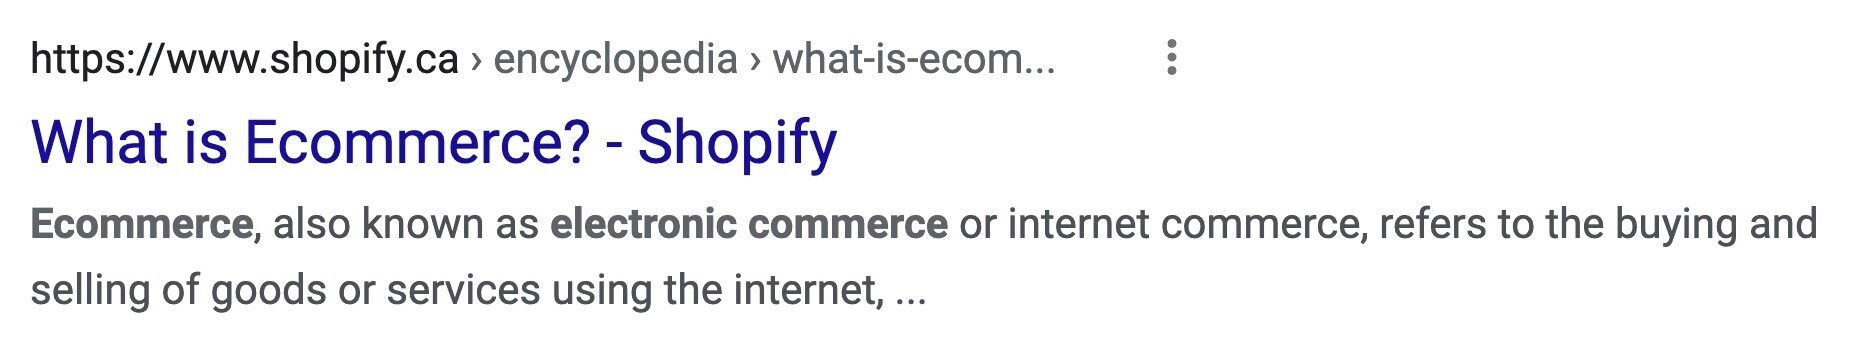 An organic search result for Shopify’s “What is Ecommerce” page with the link, title and meta description